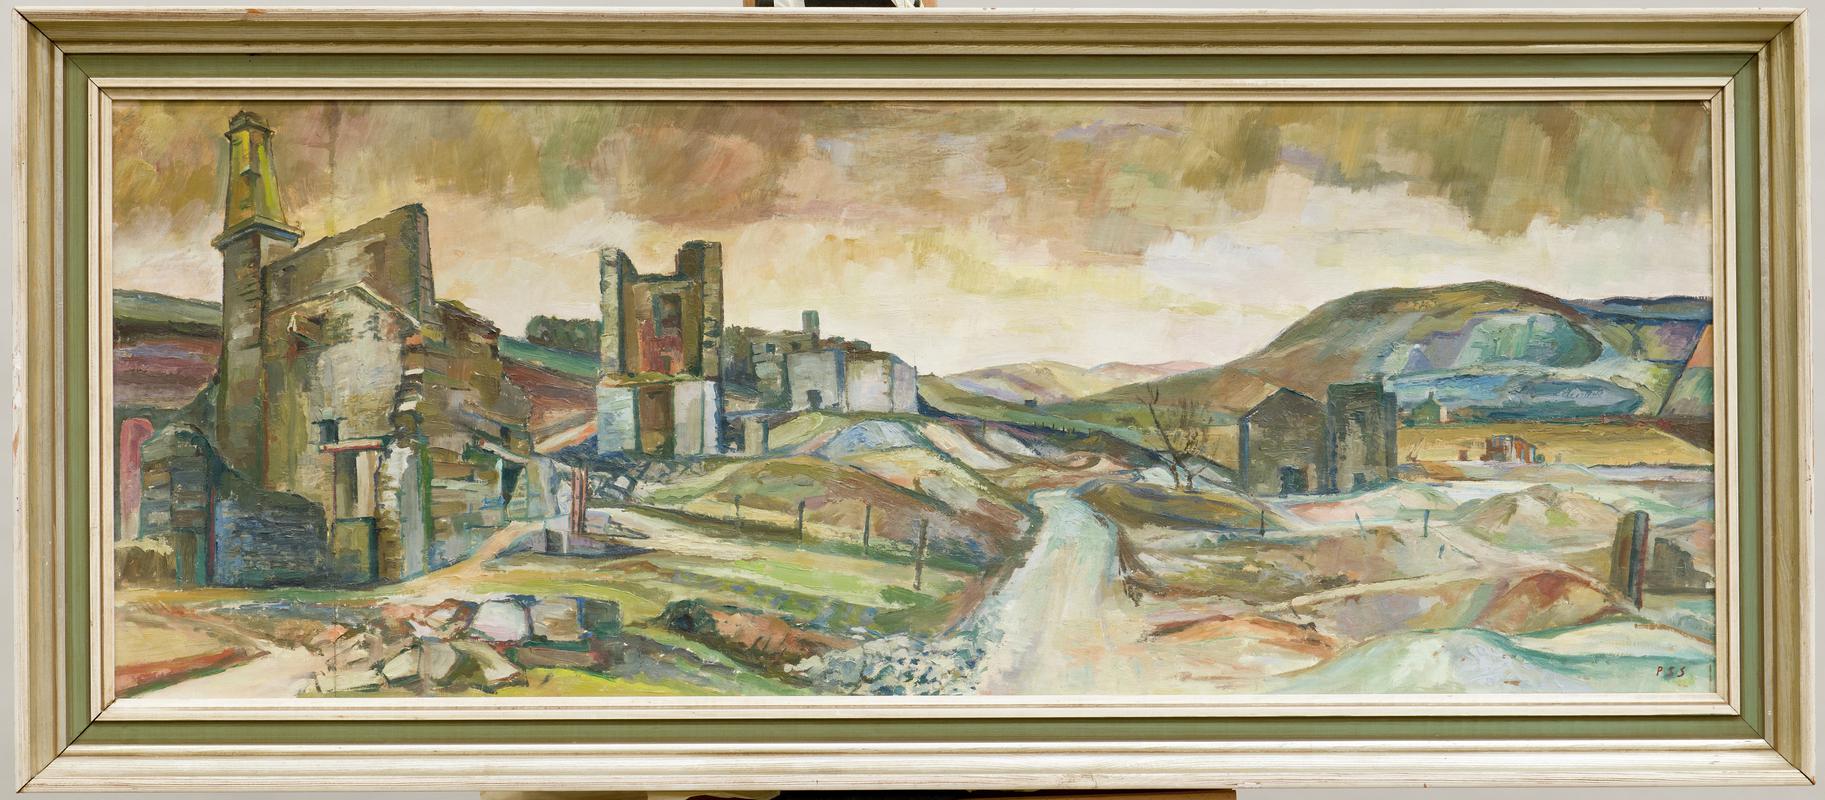 Painting 'Frongoch Lead Mines Nr Aberystwyth' by P.S. Smith